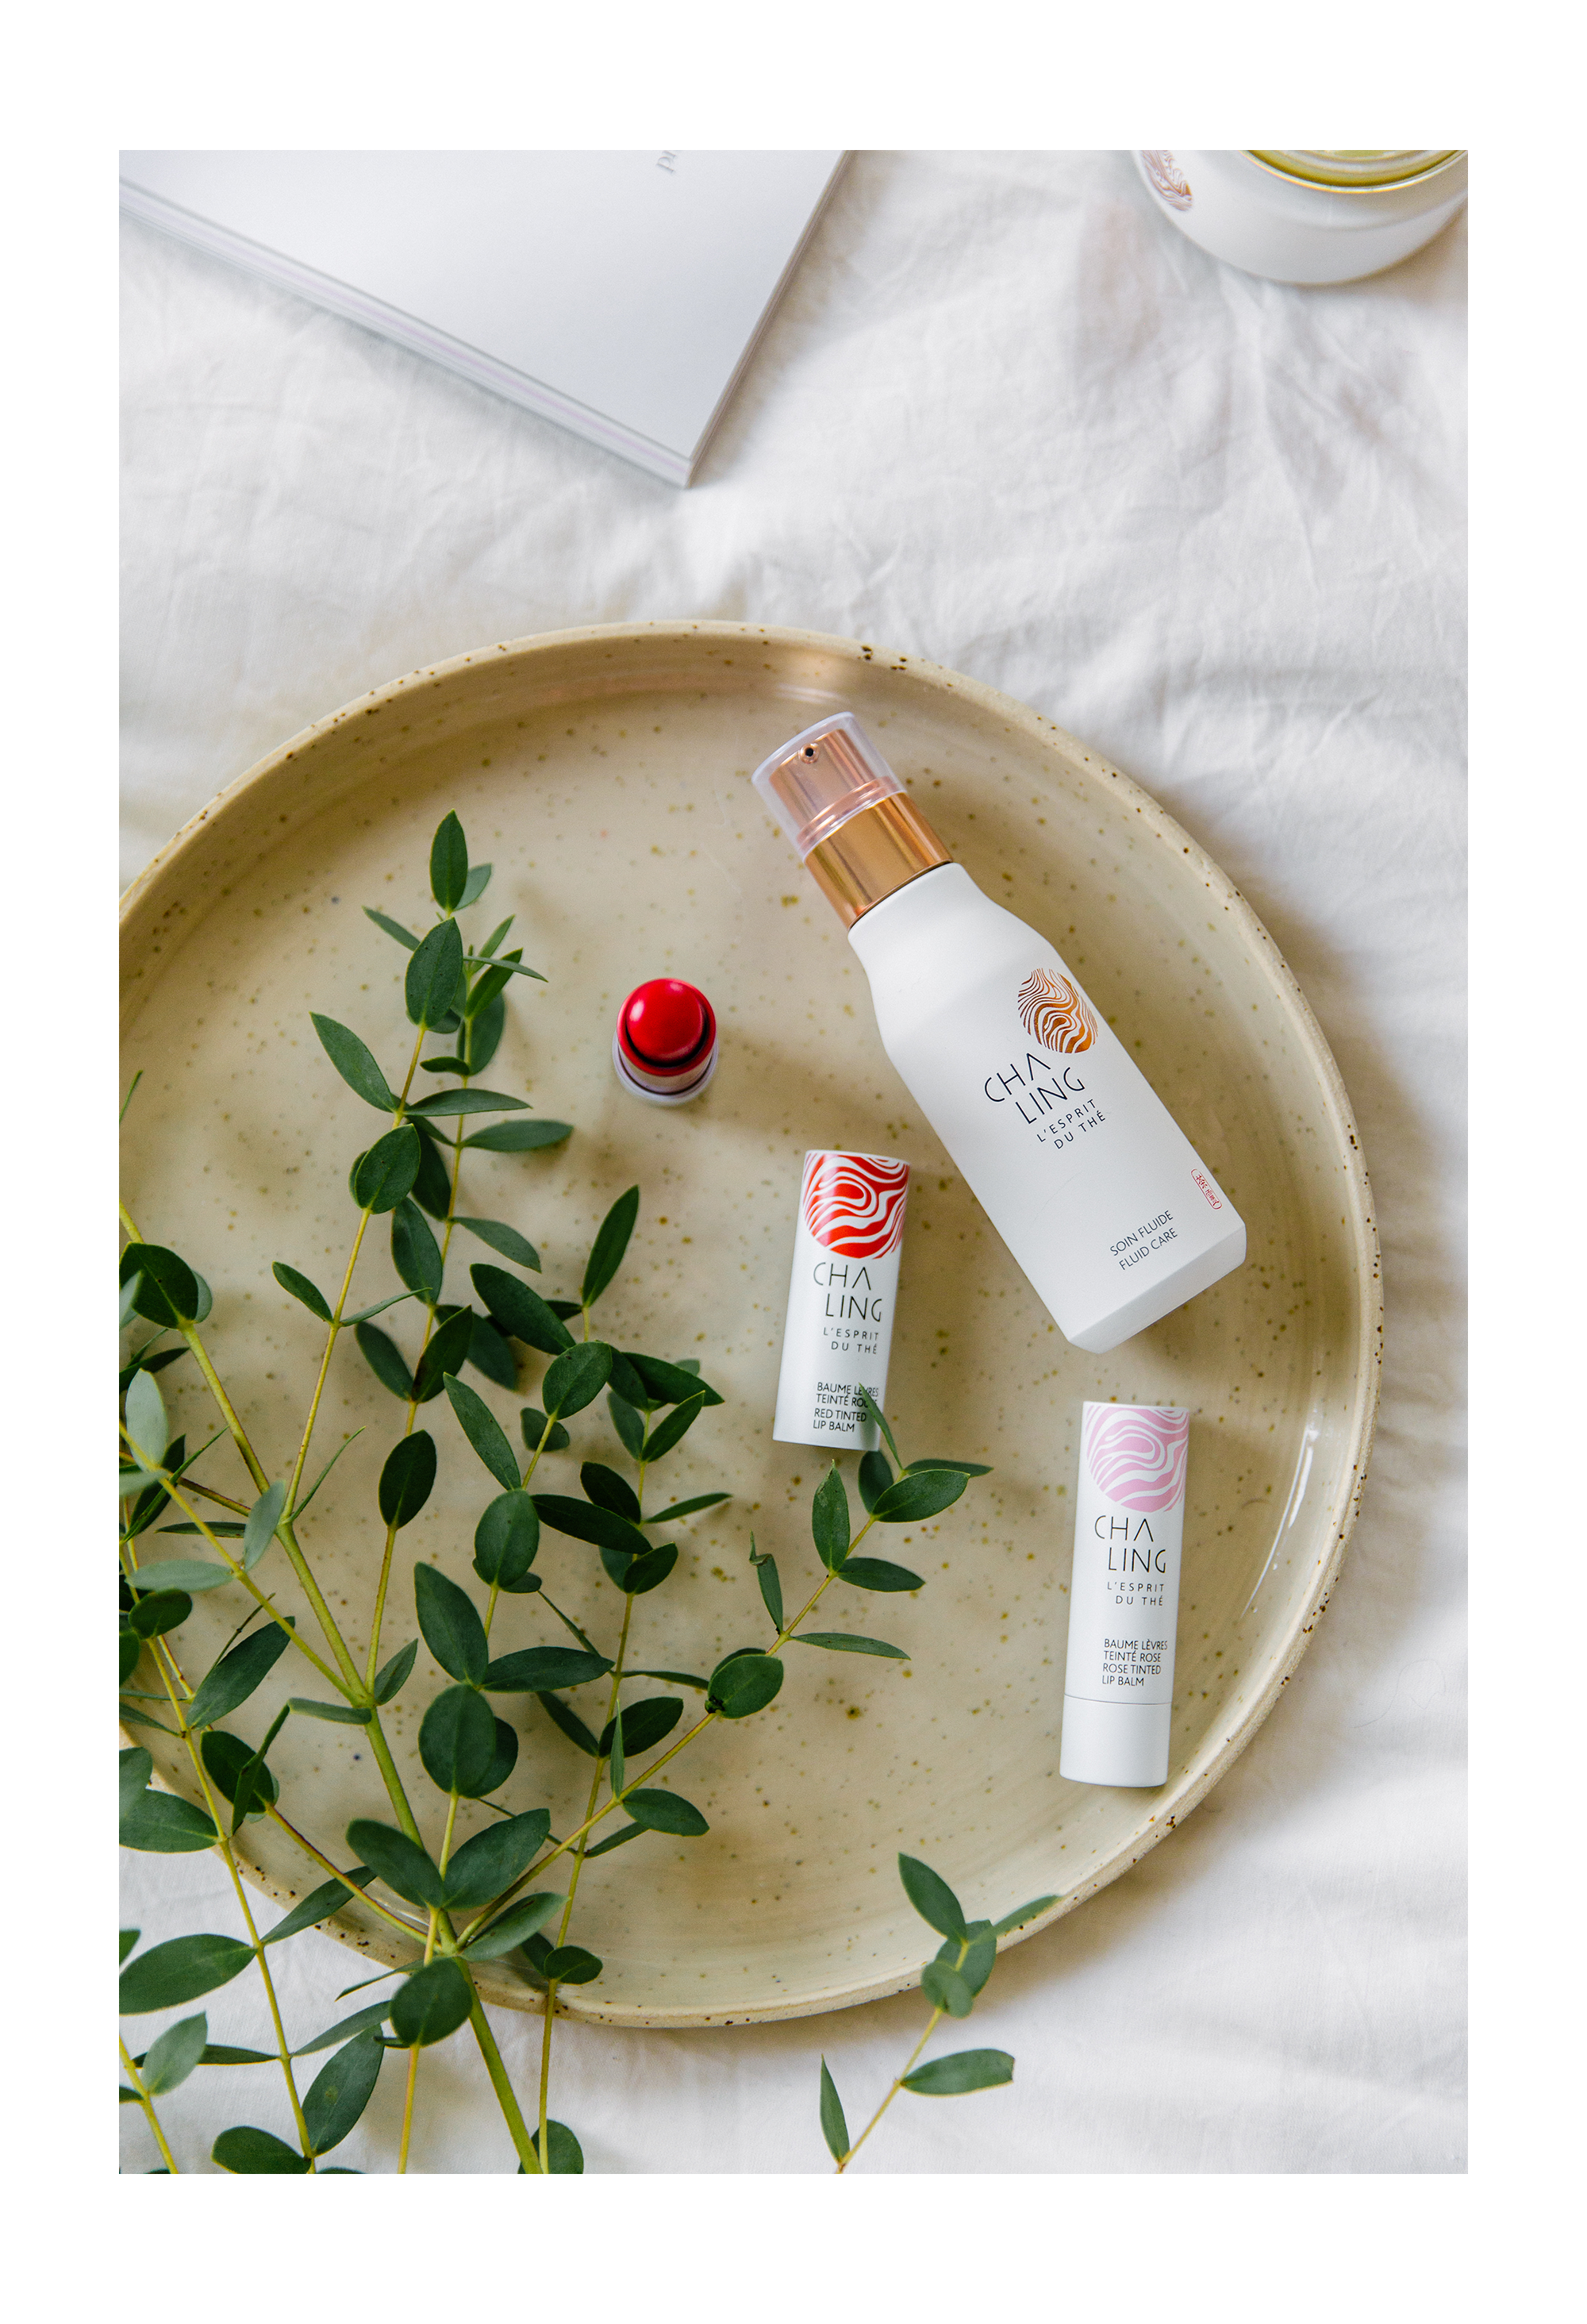 Prepping my skin for Autumn — Rue Rodier